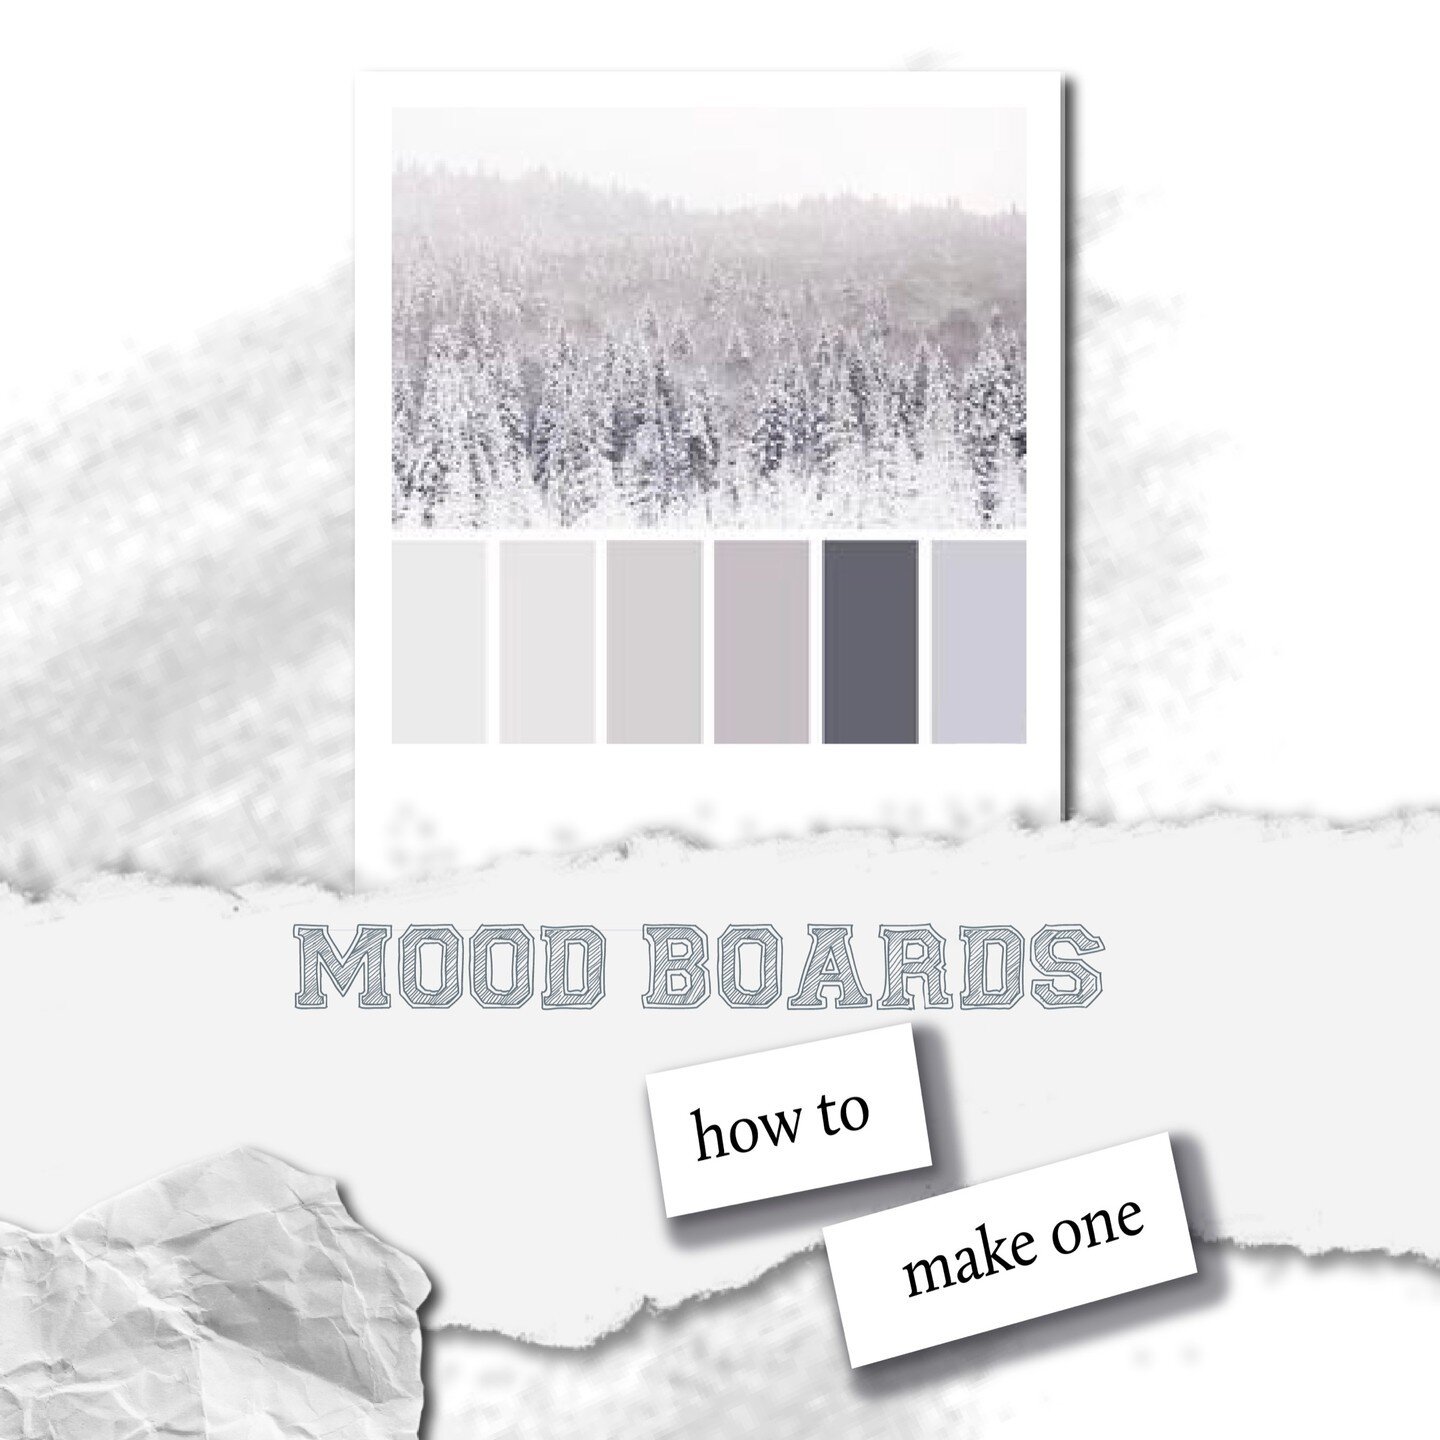 Moodboards are used by a variety of creative professionals, including graphic designers, interior decorators, set designers, fashion designers, photographers, and event planners. 🌈🛢️✂️

Basically, anyone who is developing a collection or environmen